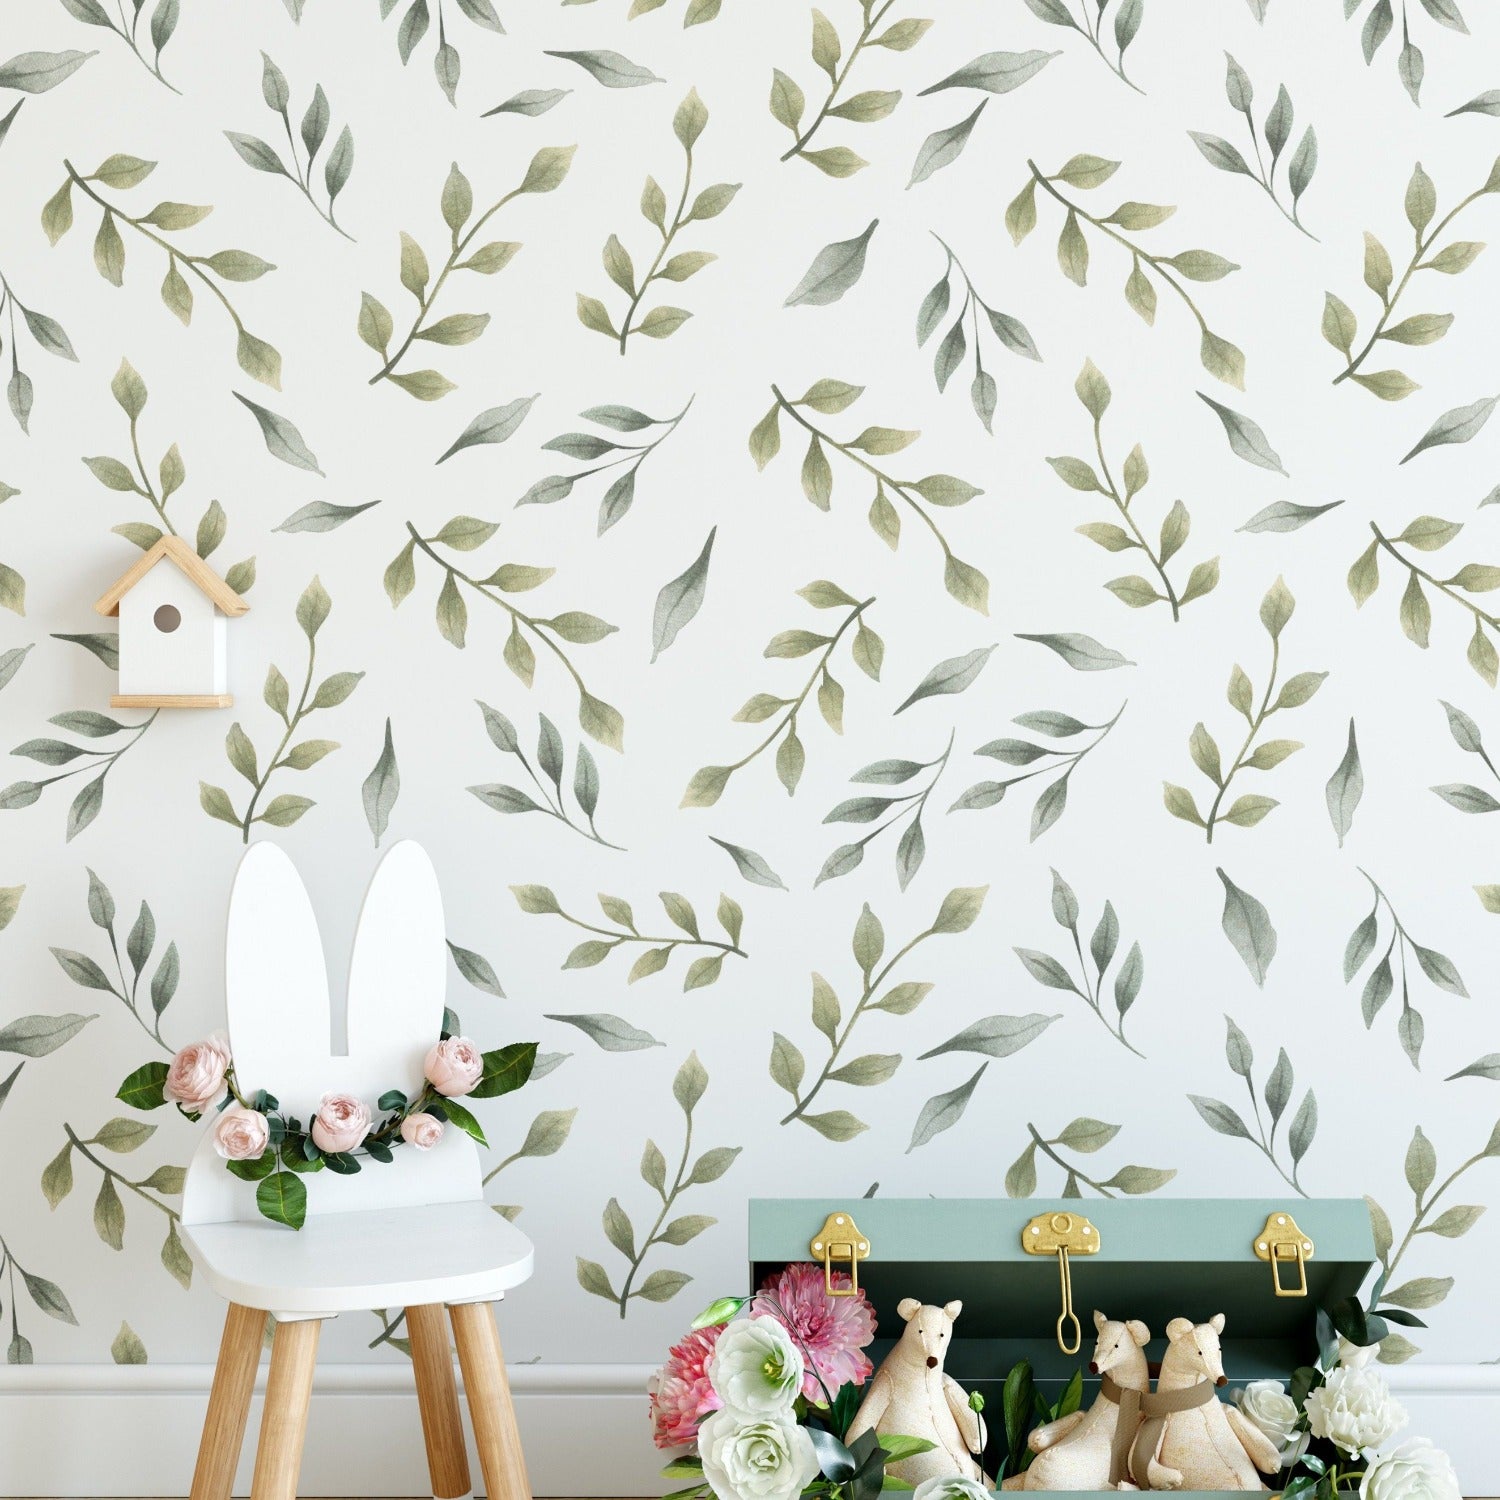 A children's room with one wall decorated with Nursery Green Floral Wallpaper, featuring soft green botanical prints. The natural motif provides a serene backdrop for a white chair adorned with bunny ears and a small shelf with a wooden birdhouse, adding a whimsical touch to the nurturing environment